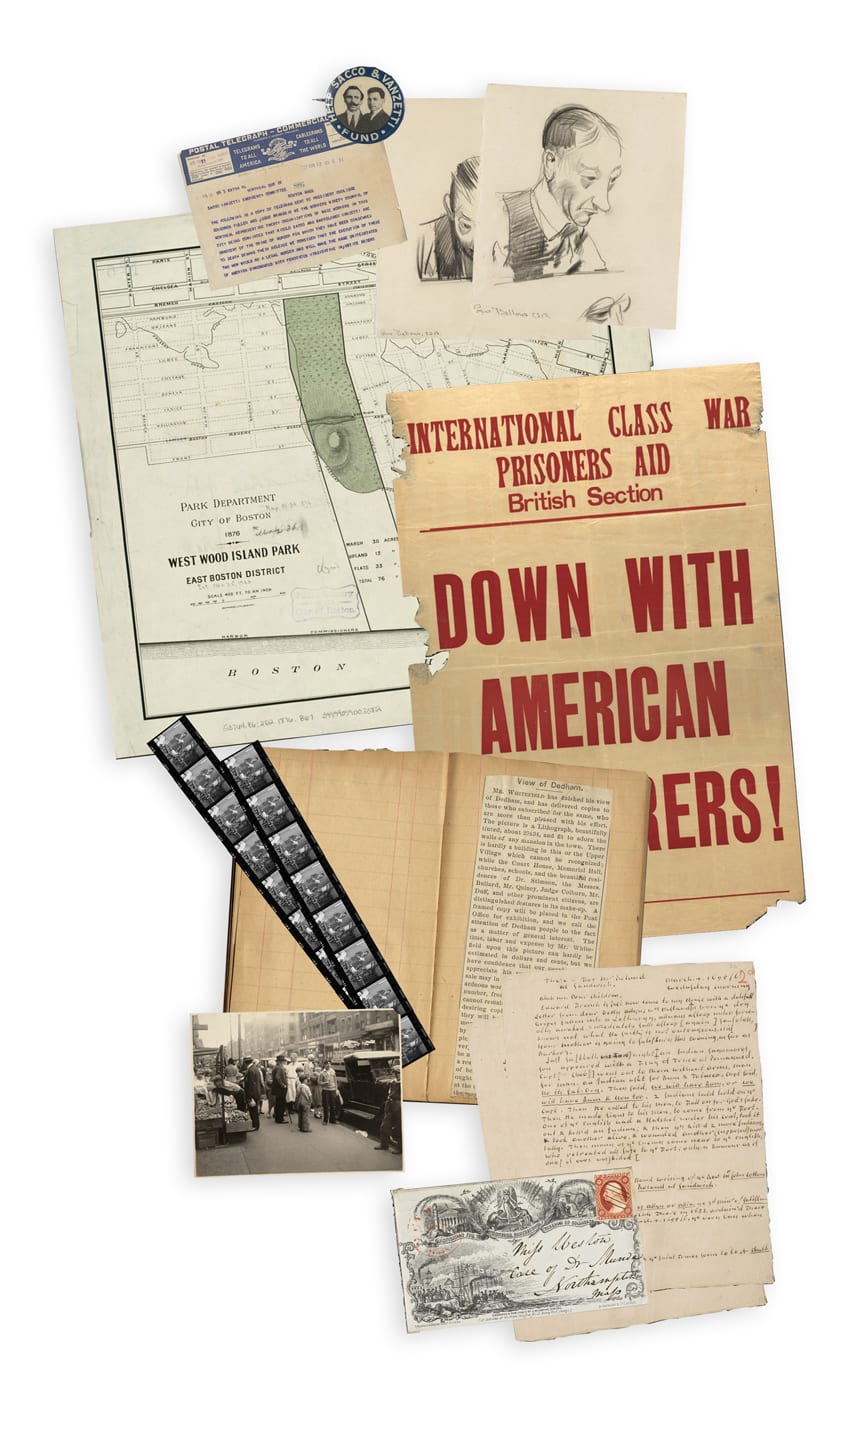 Letters, a telegram, photographs and negatives, a broadside, map, notebooks, and pencil sketch of a man in profile.